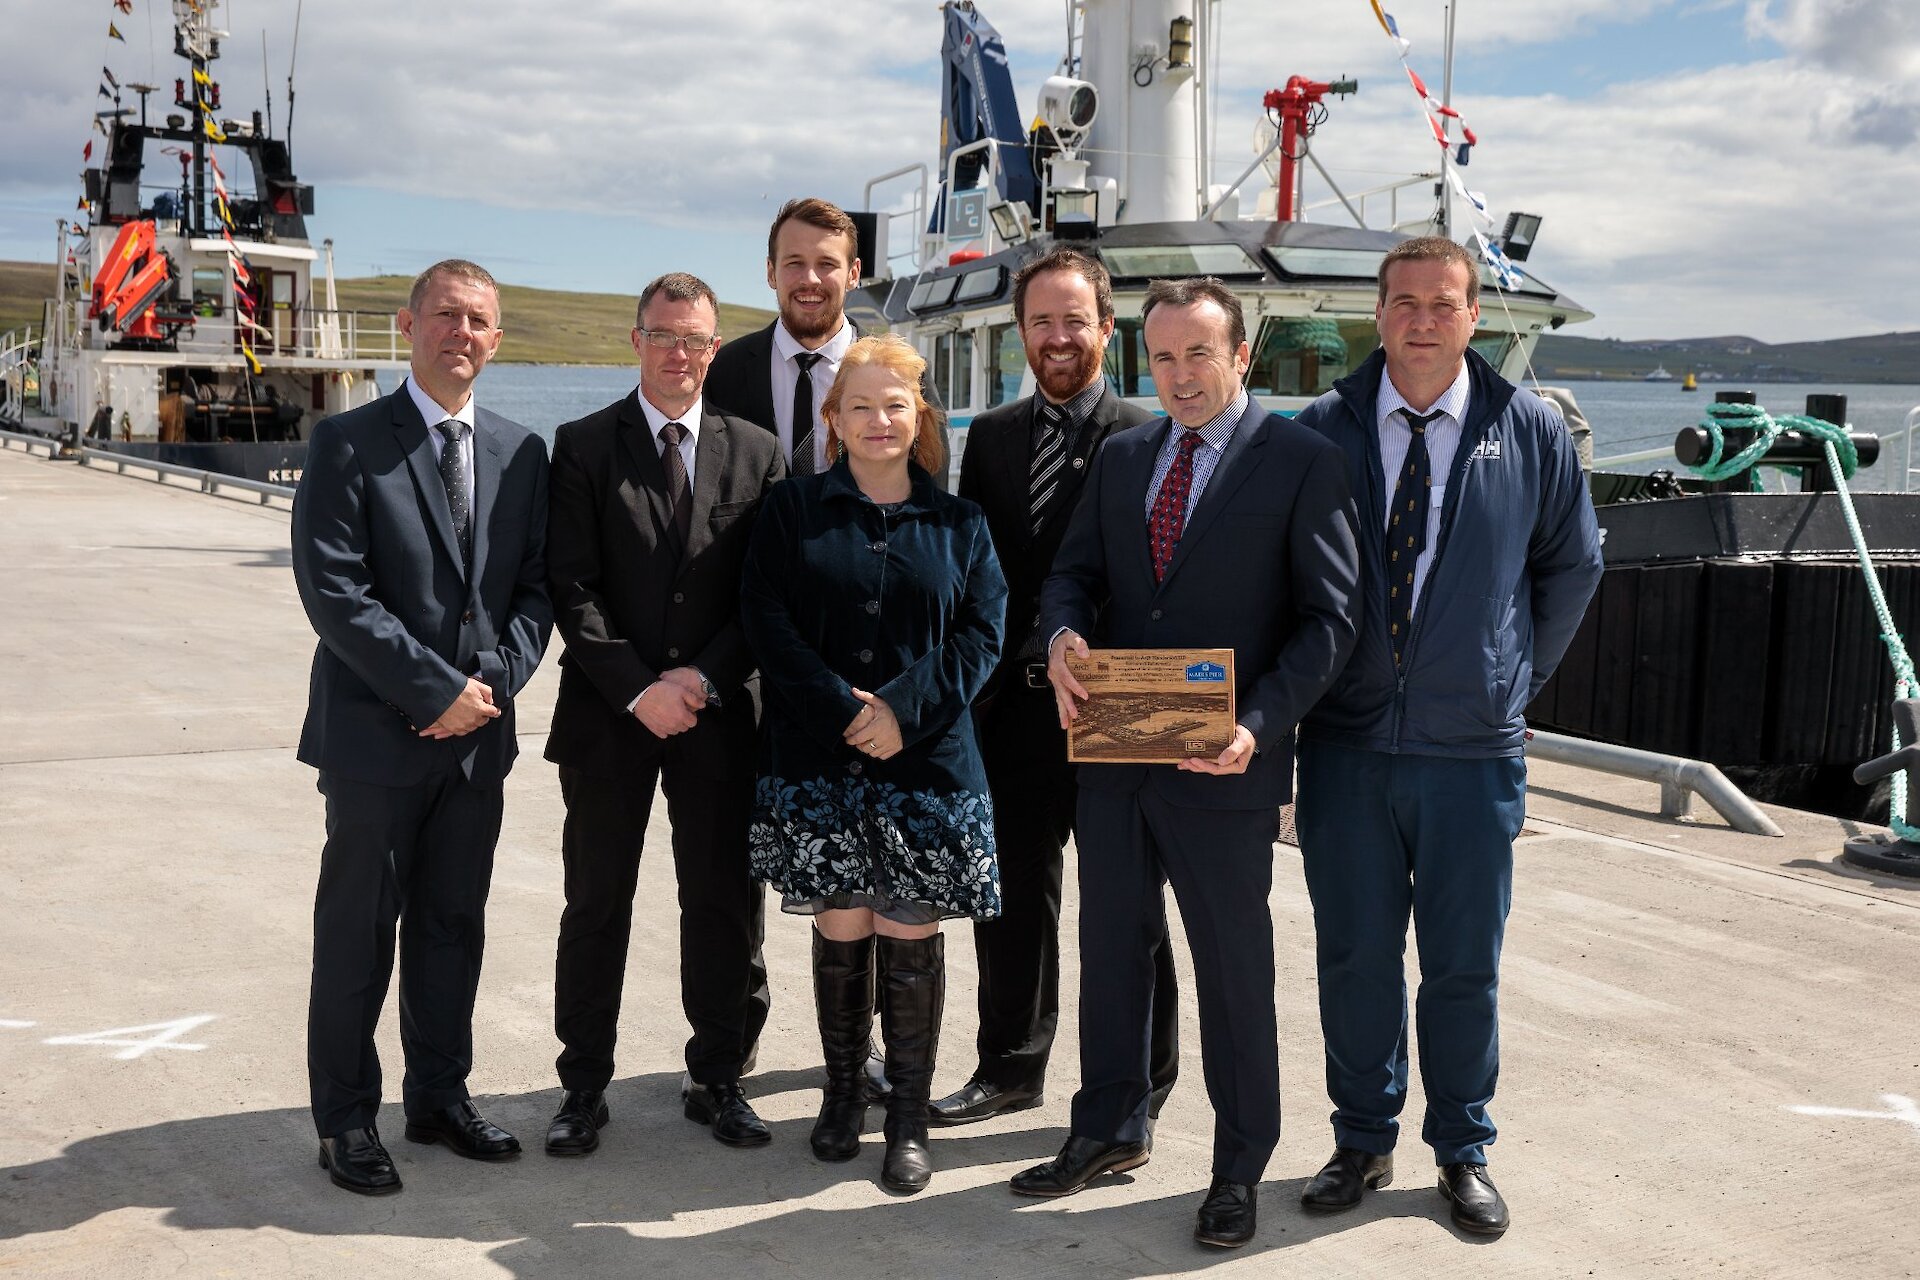 Some of our staff at the official opening of the Pier on 12 July 2017.